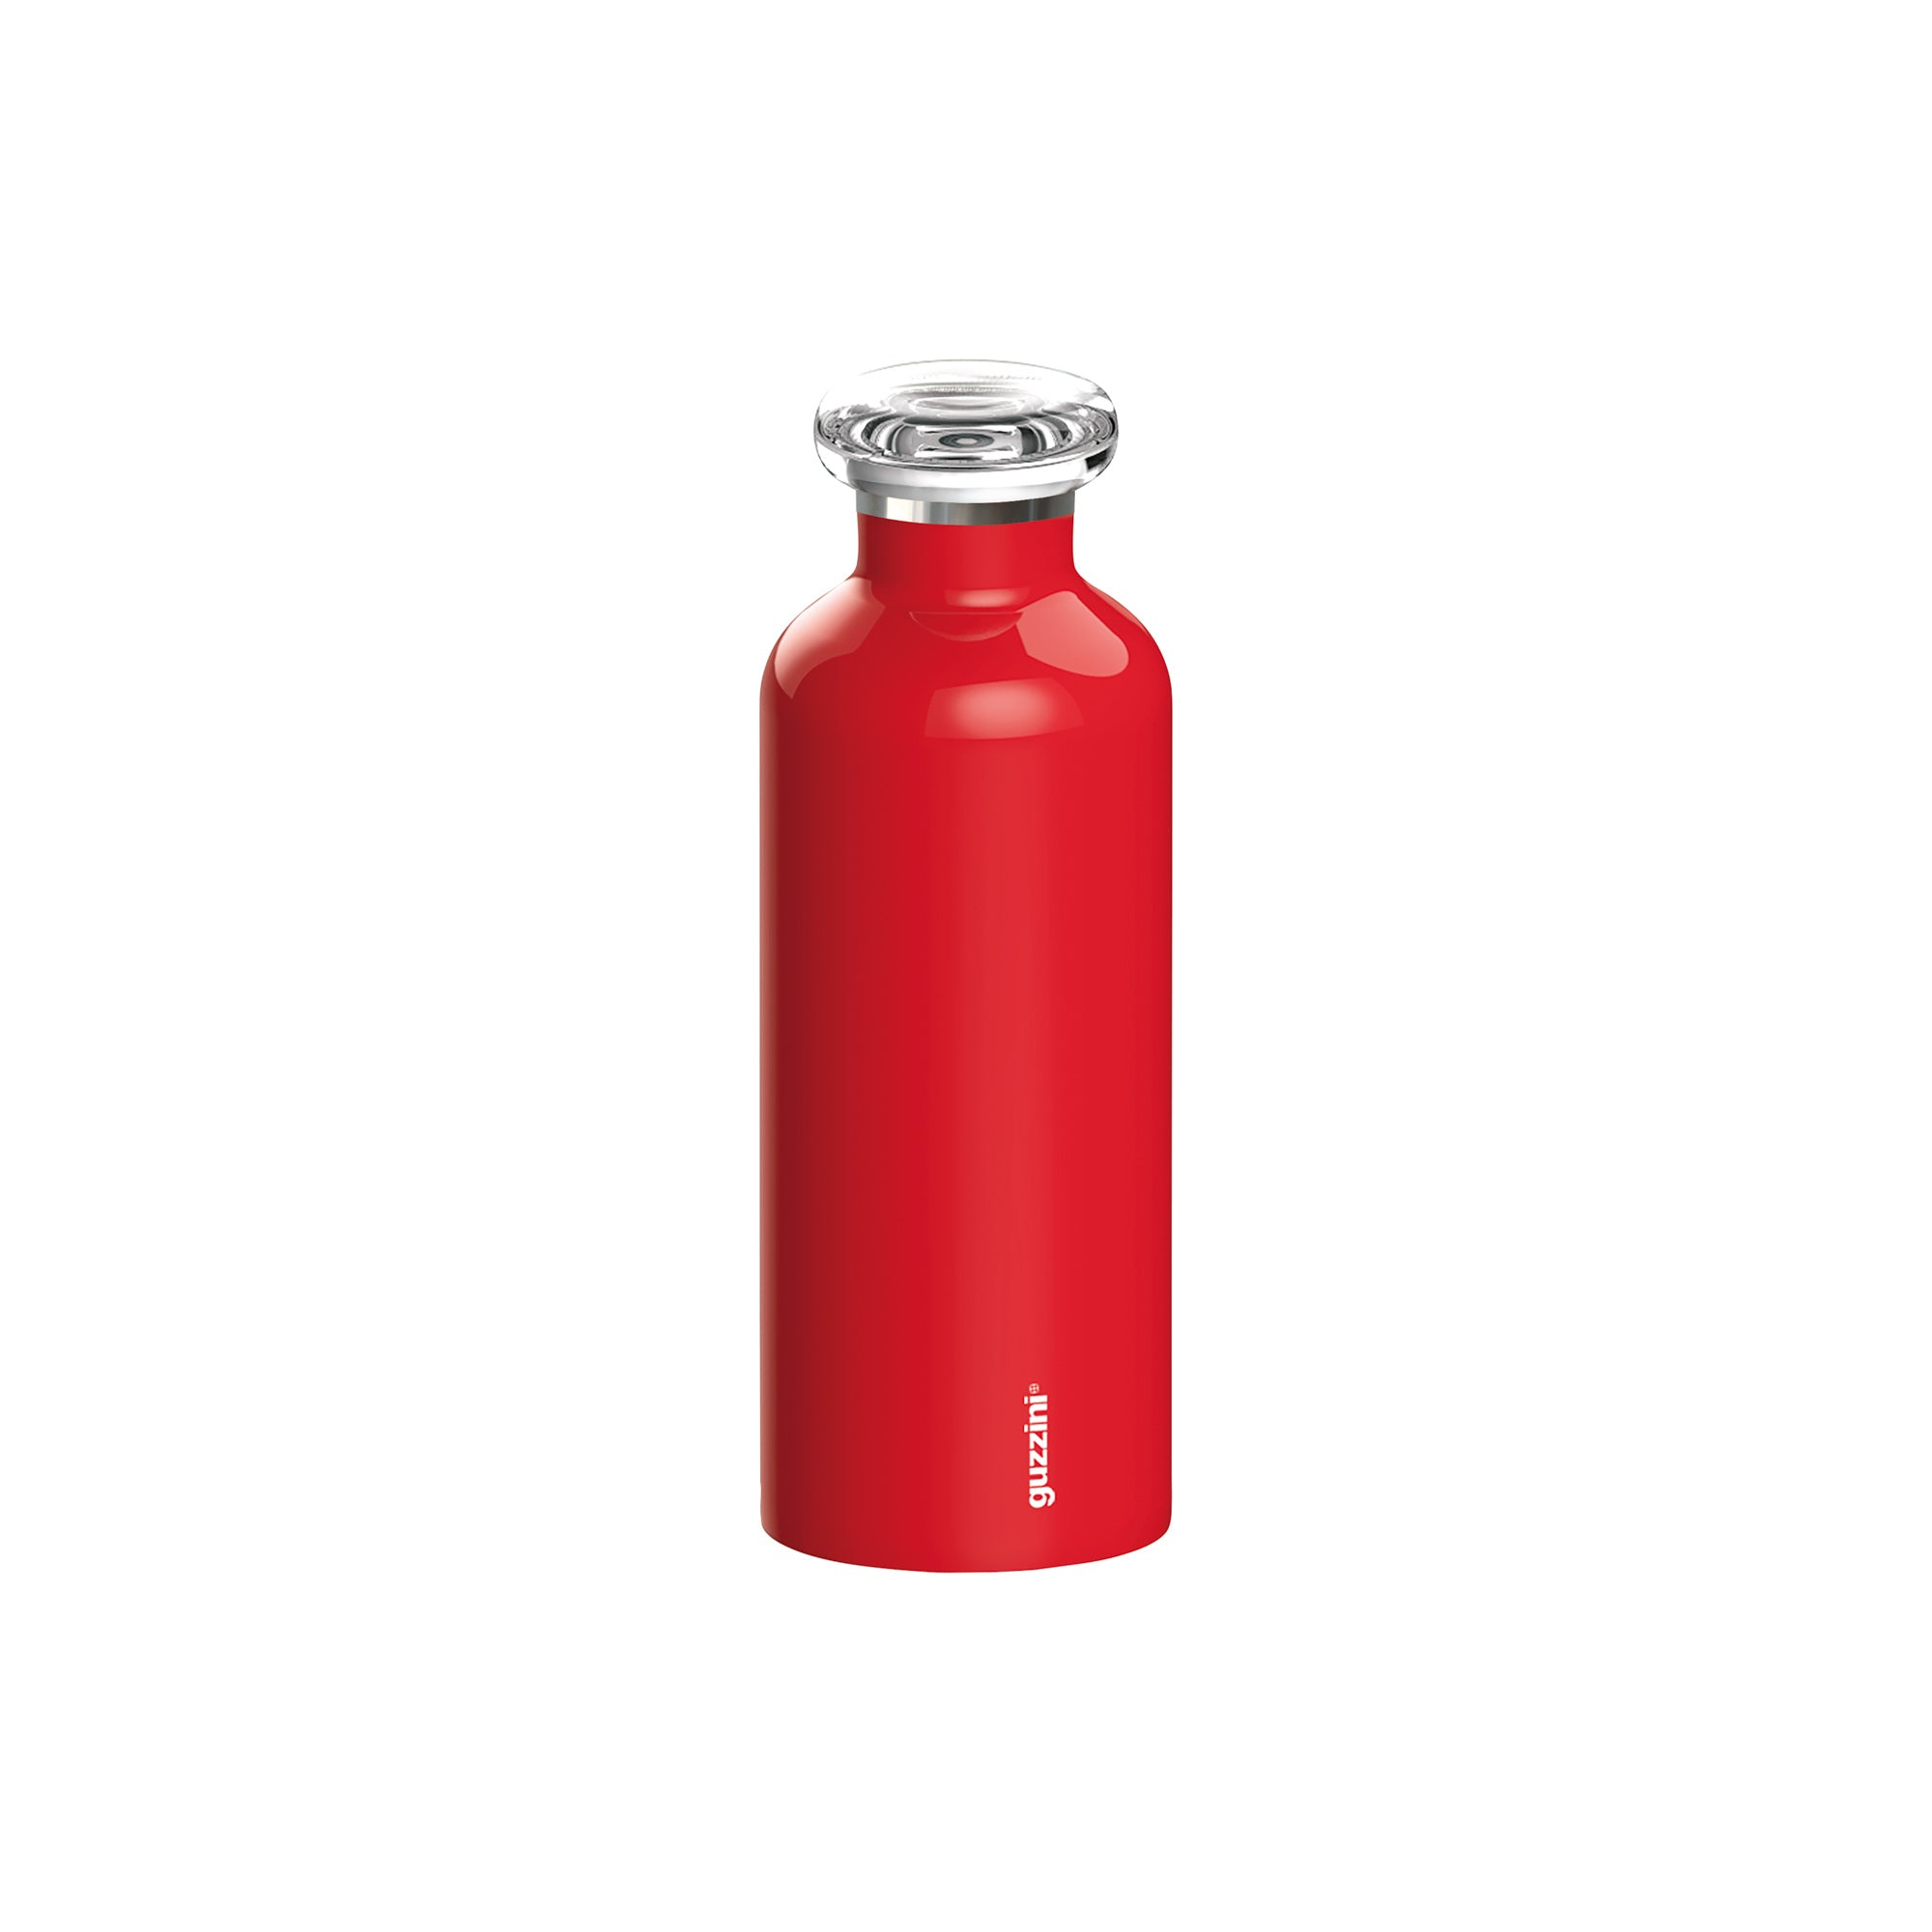 THERMAL TRAVEL BOTTLE "ON THE GO"